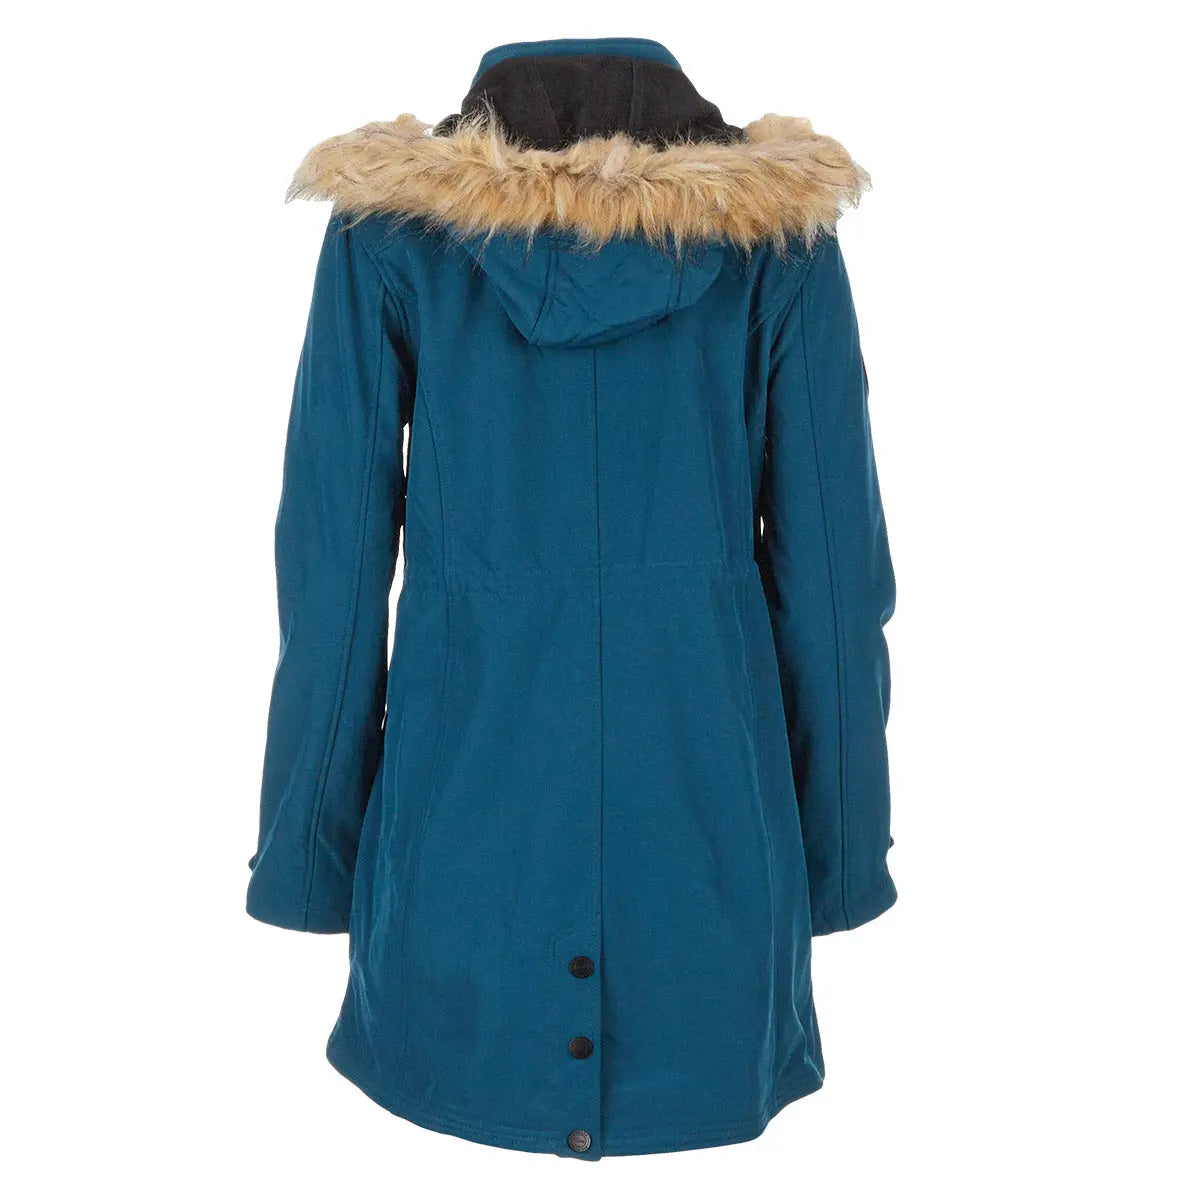 Canada Weather Gear Women's Softshell Anorak with Faux Fur Trim